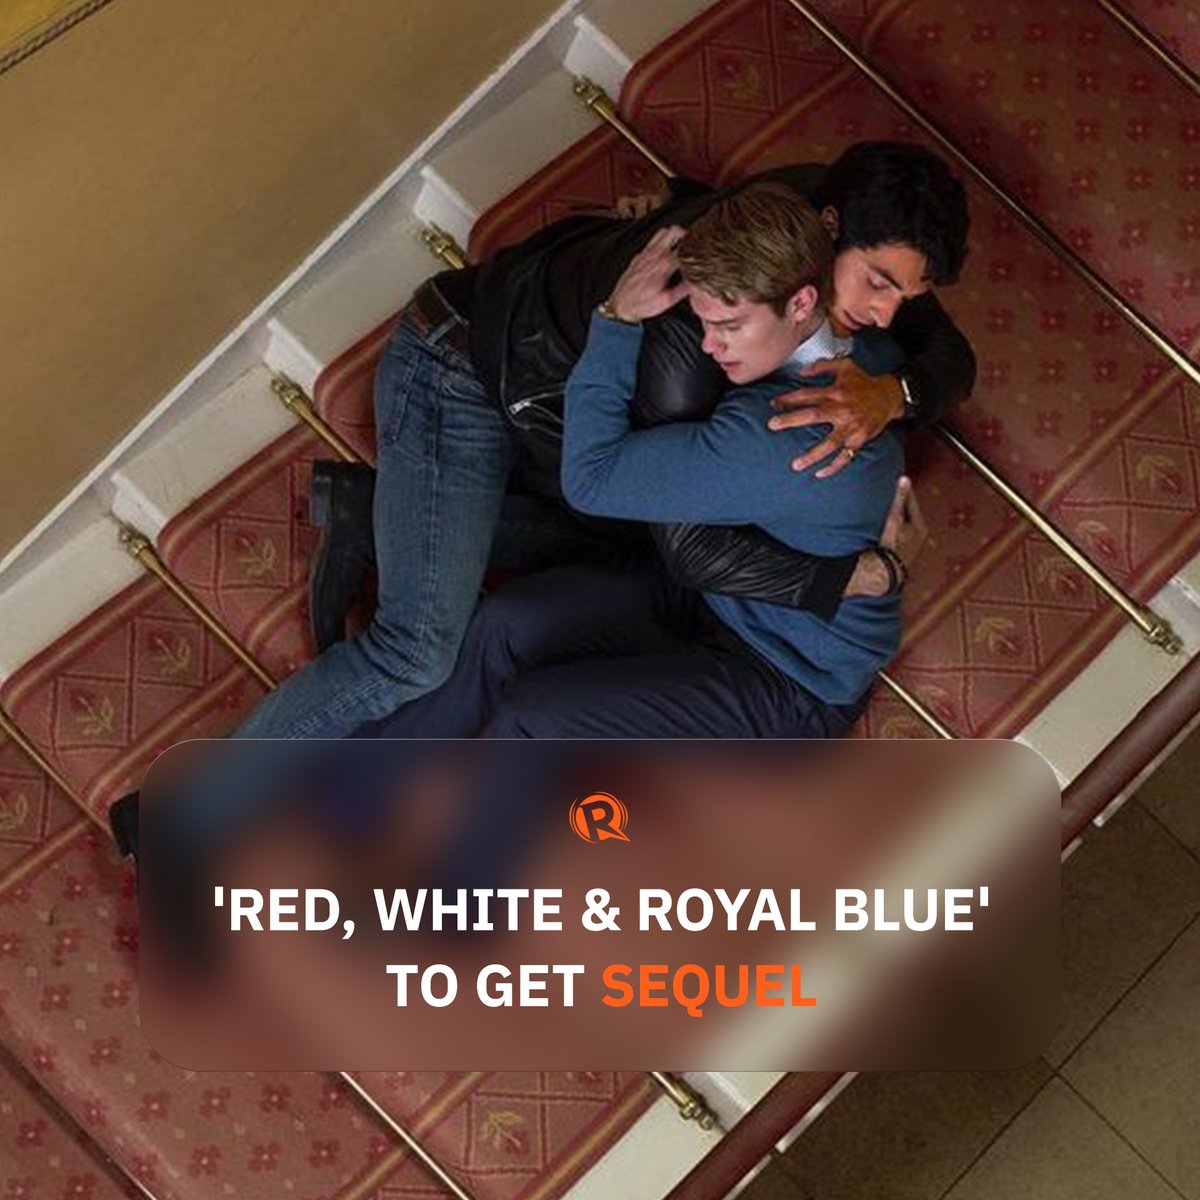 'FANCY ANOTHER SLICE?' 🇺🇸🇬🇧🍰 Romantic comedy film 'Red, White & Royal Blue' is getting a sequel, Amazon MGM Studios announced on Thursday, May 9. rplr.co/entertainment